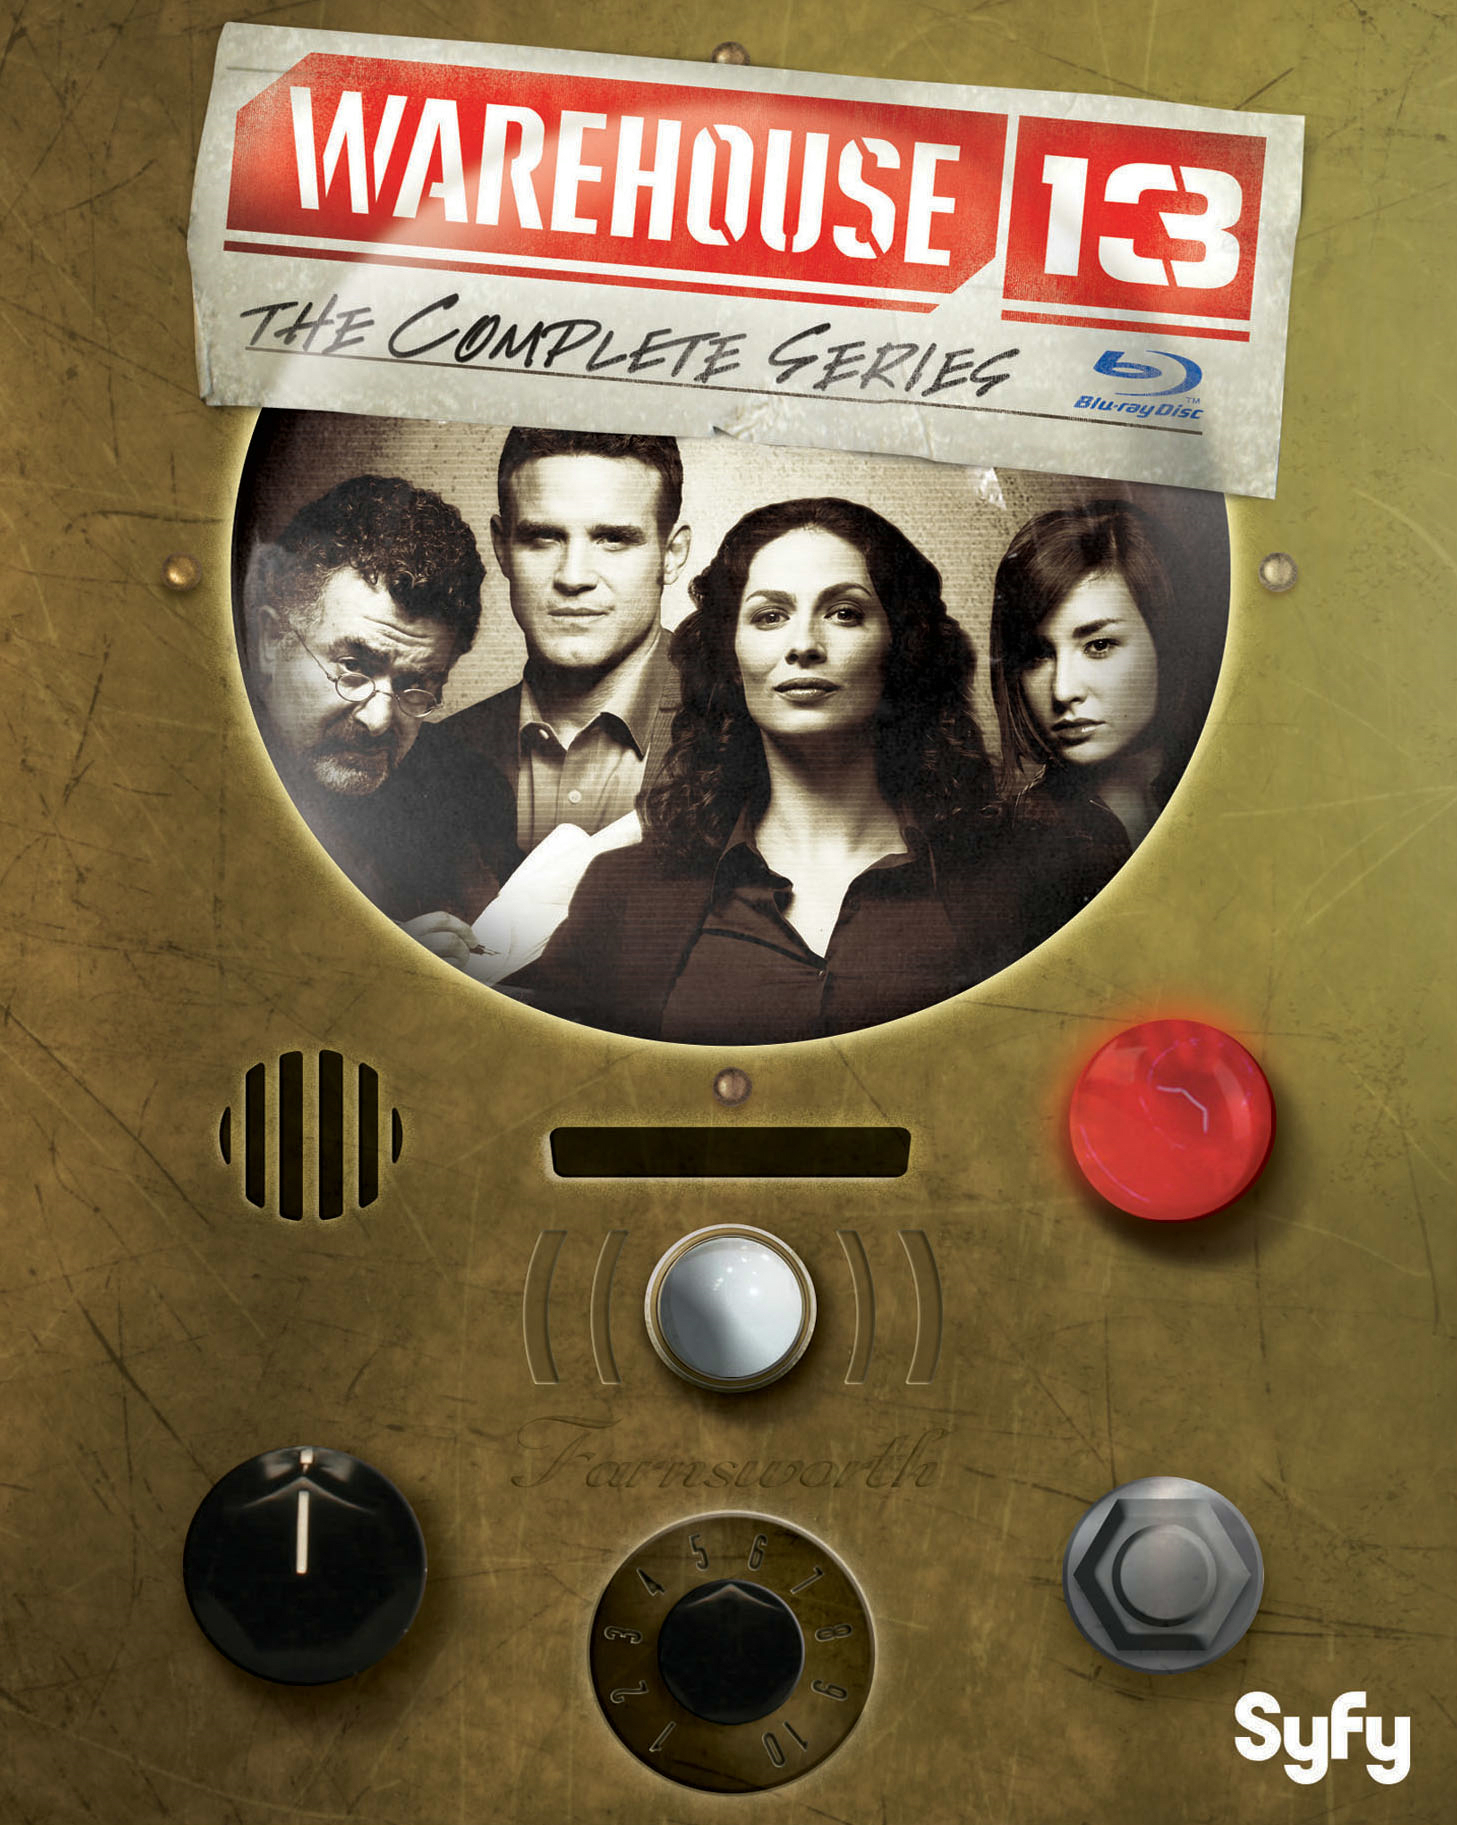 Warehouse 13: The Complete Series (Blu-ray New Box Art) - Blu-ray [ 2009 ]  - Sci Fi Television On Blu-ray - TV Shows On GRUV